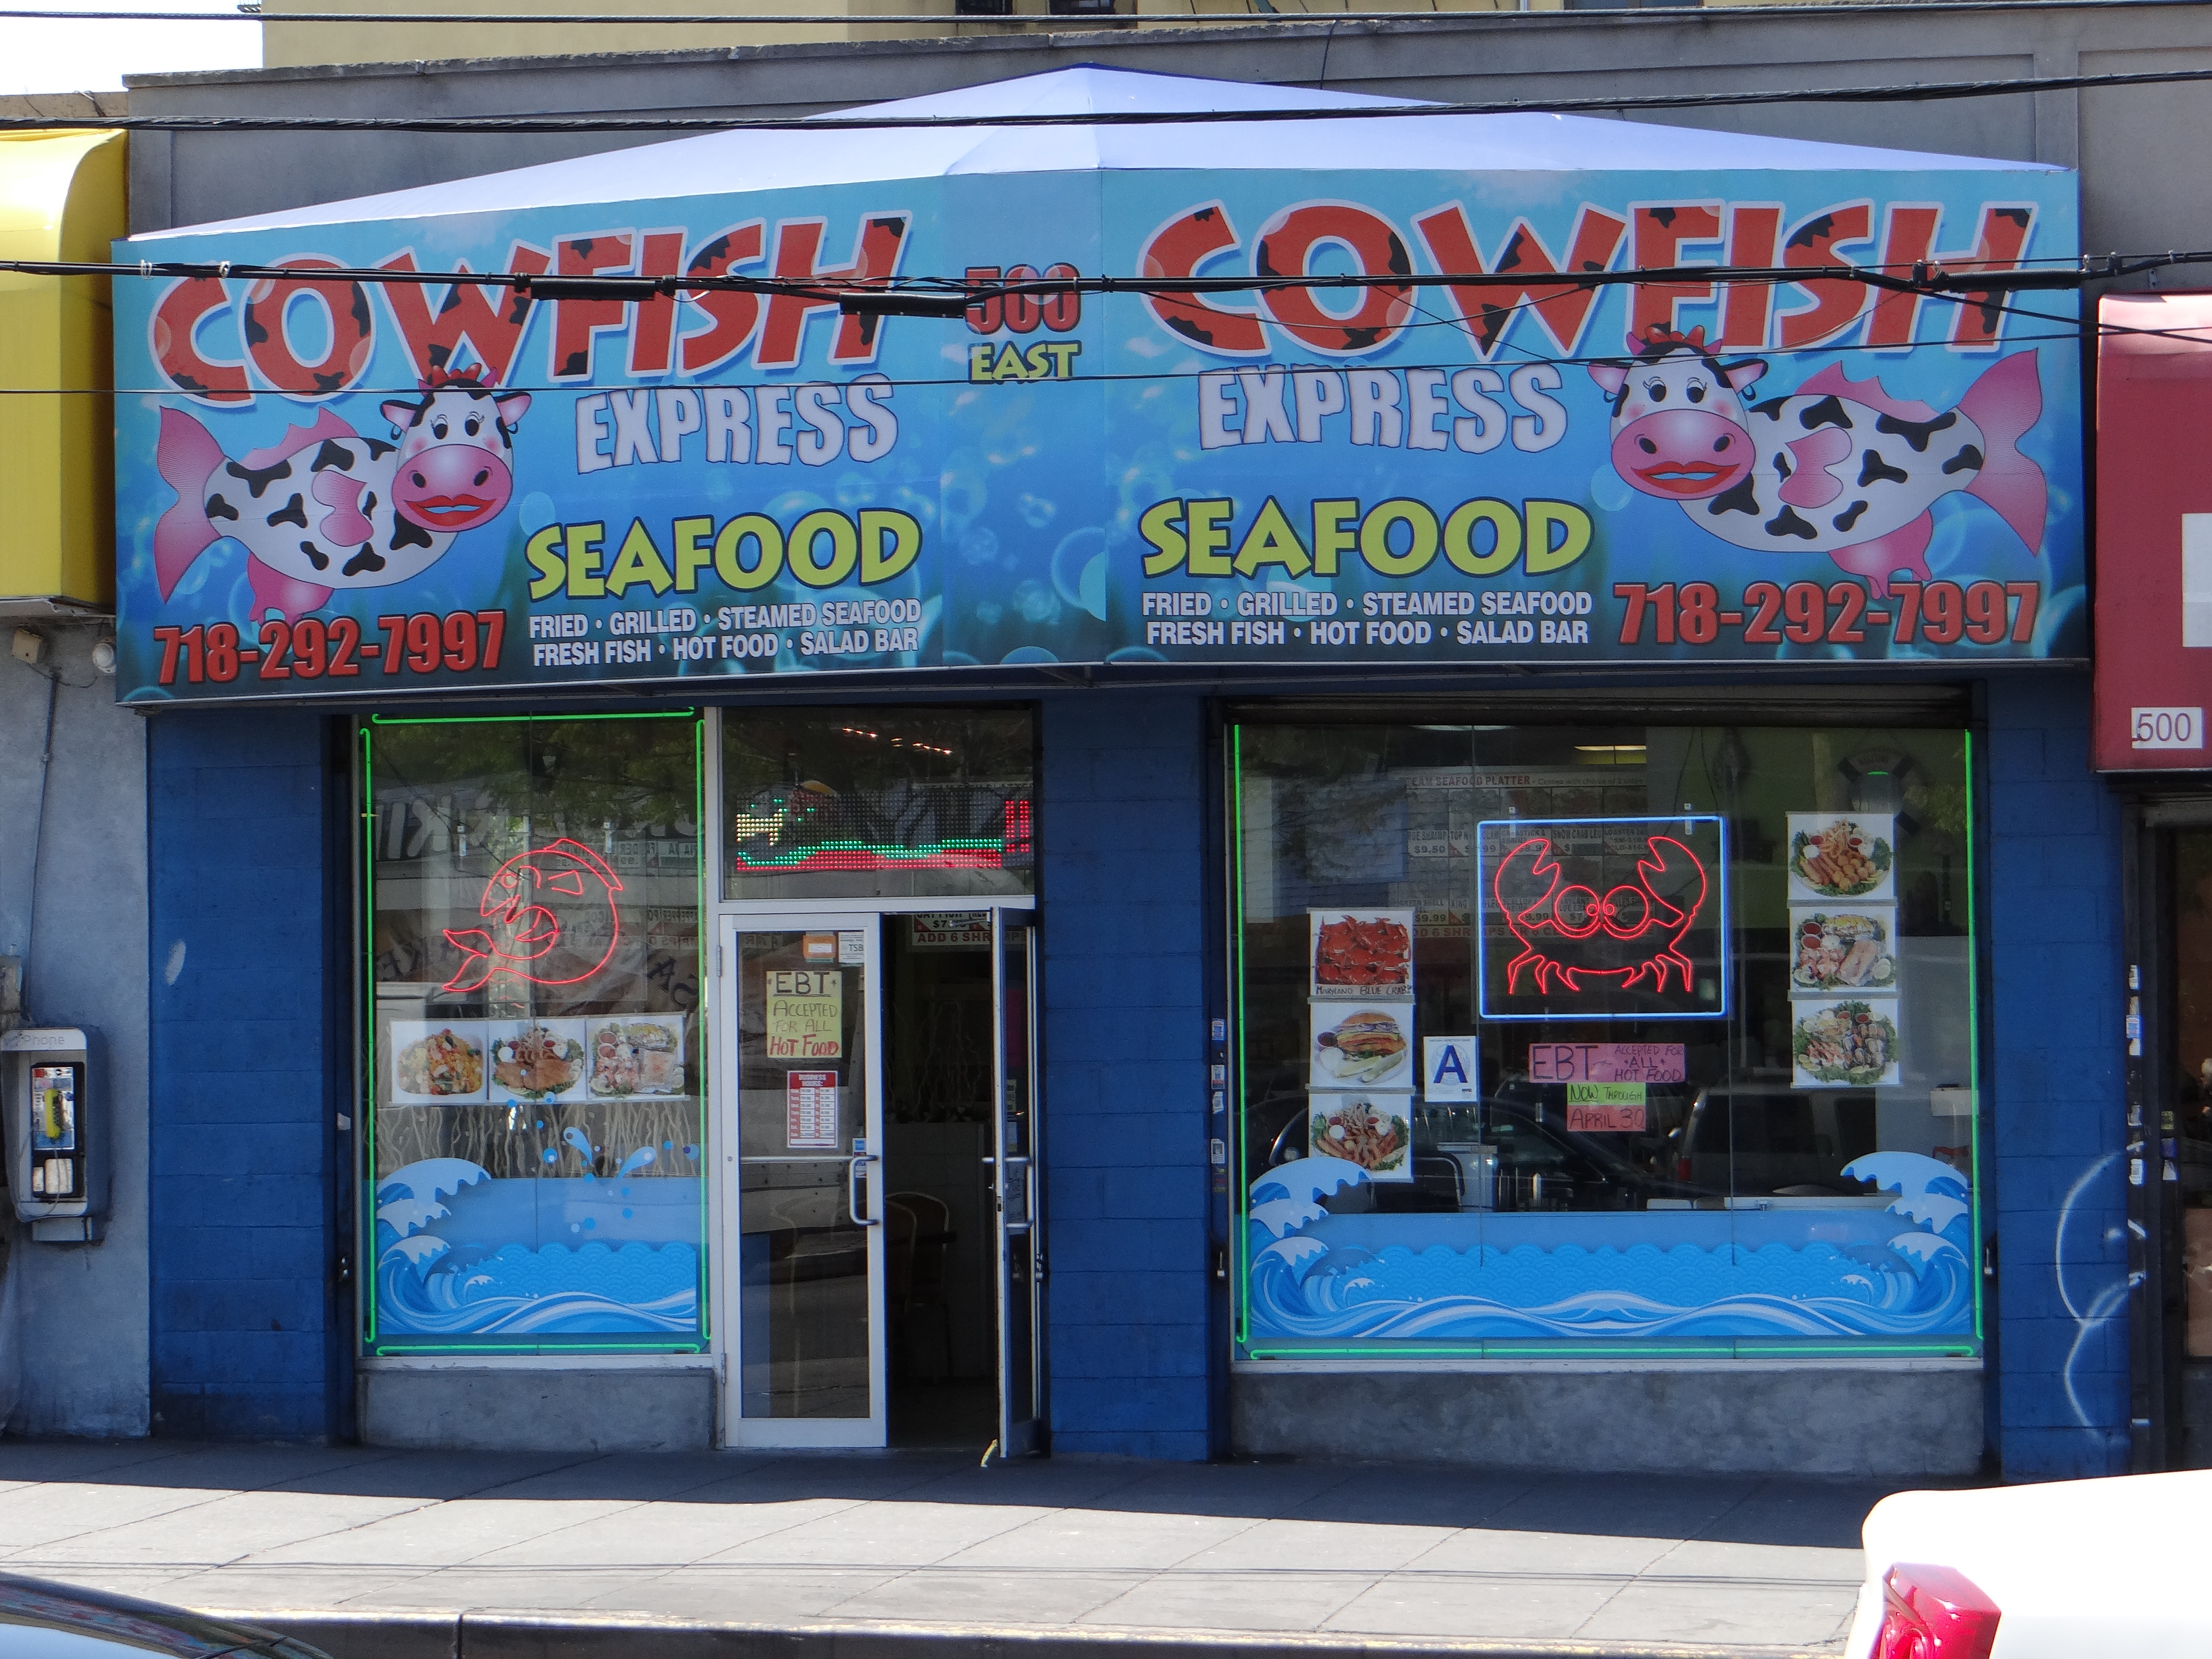 Cowfish seafood place on E. 149th Street